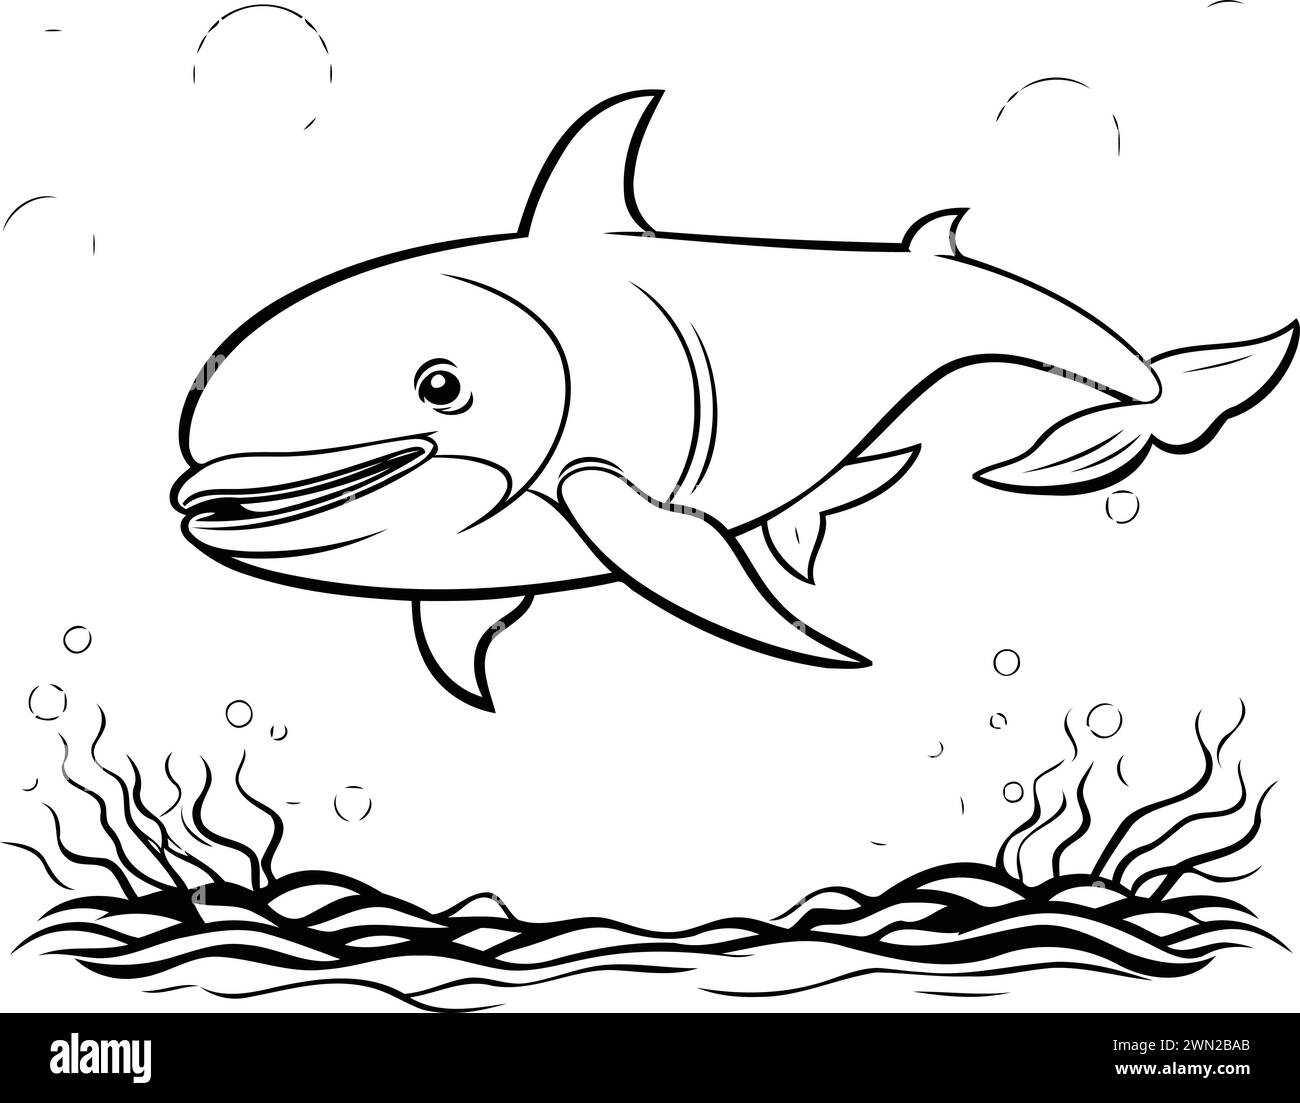 Jumping fish illustration Cut Out Stock Images & Pictures - Page 3